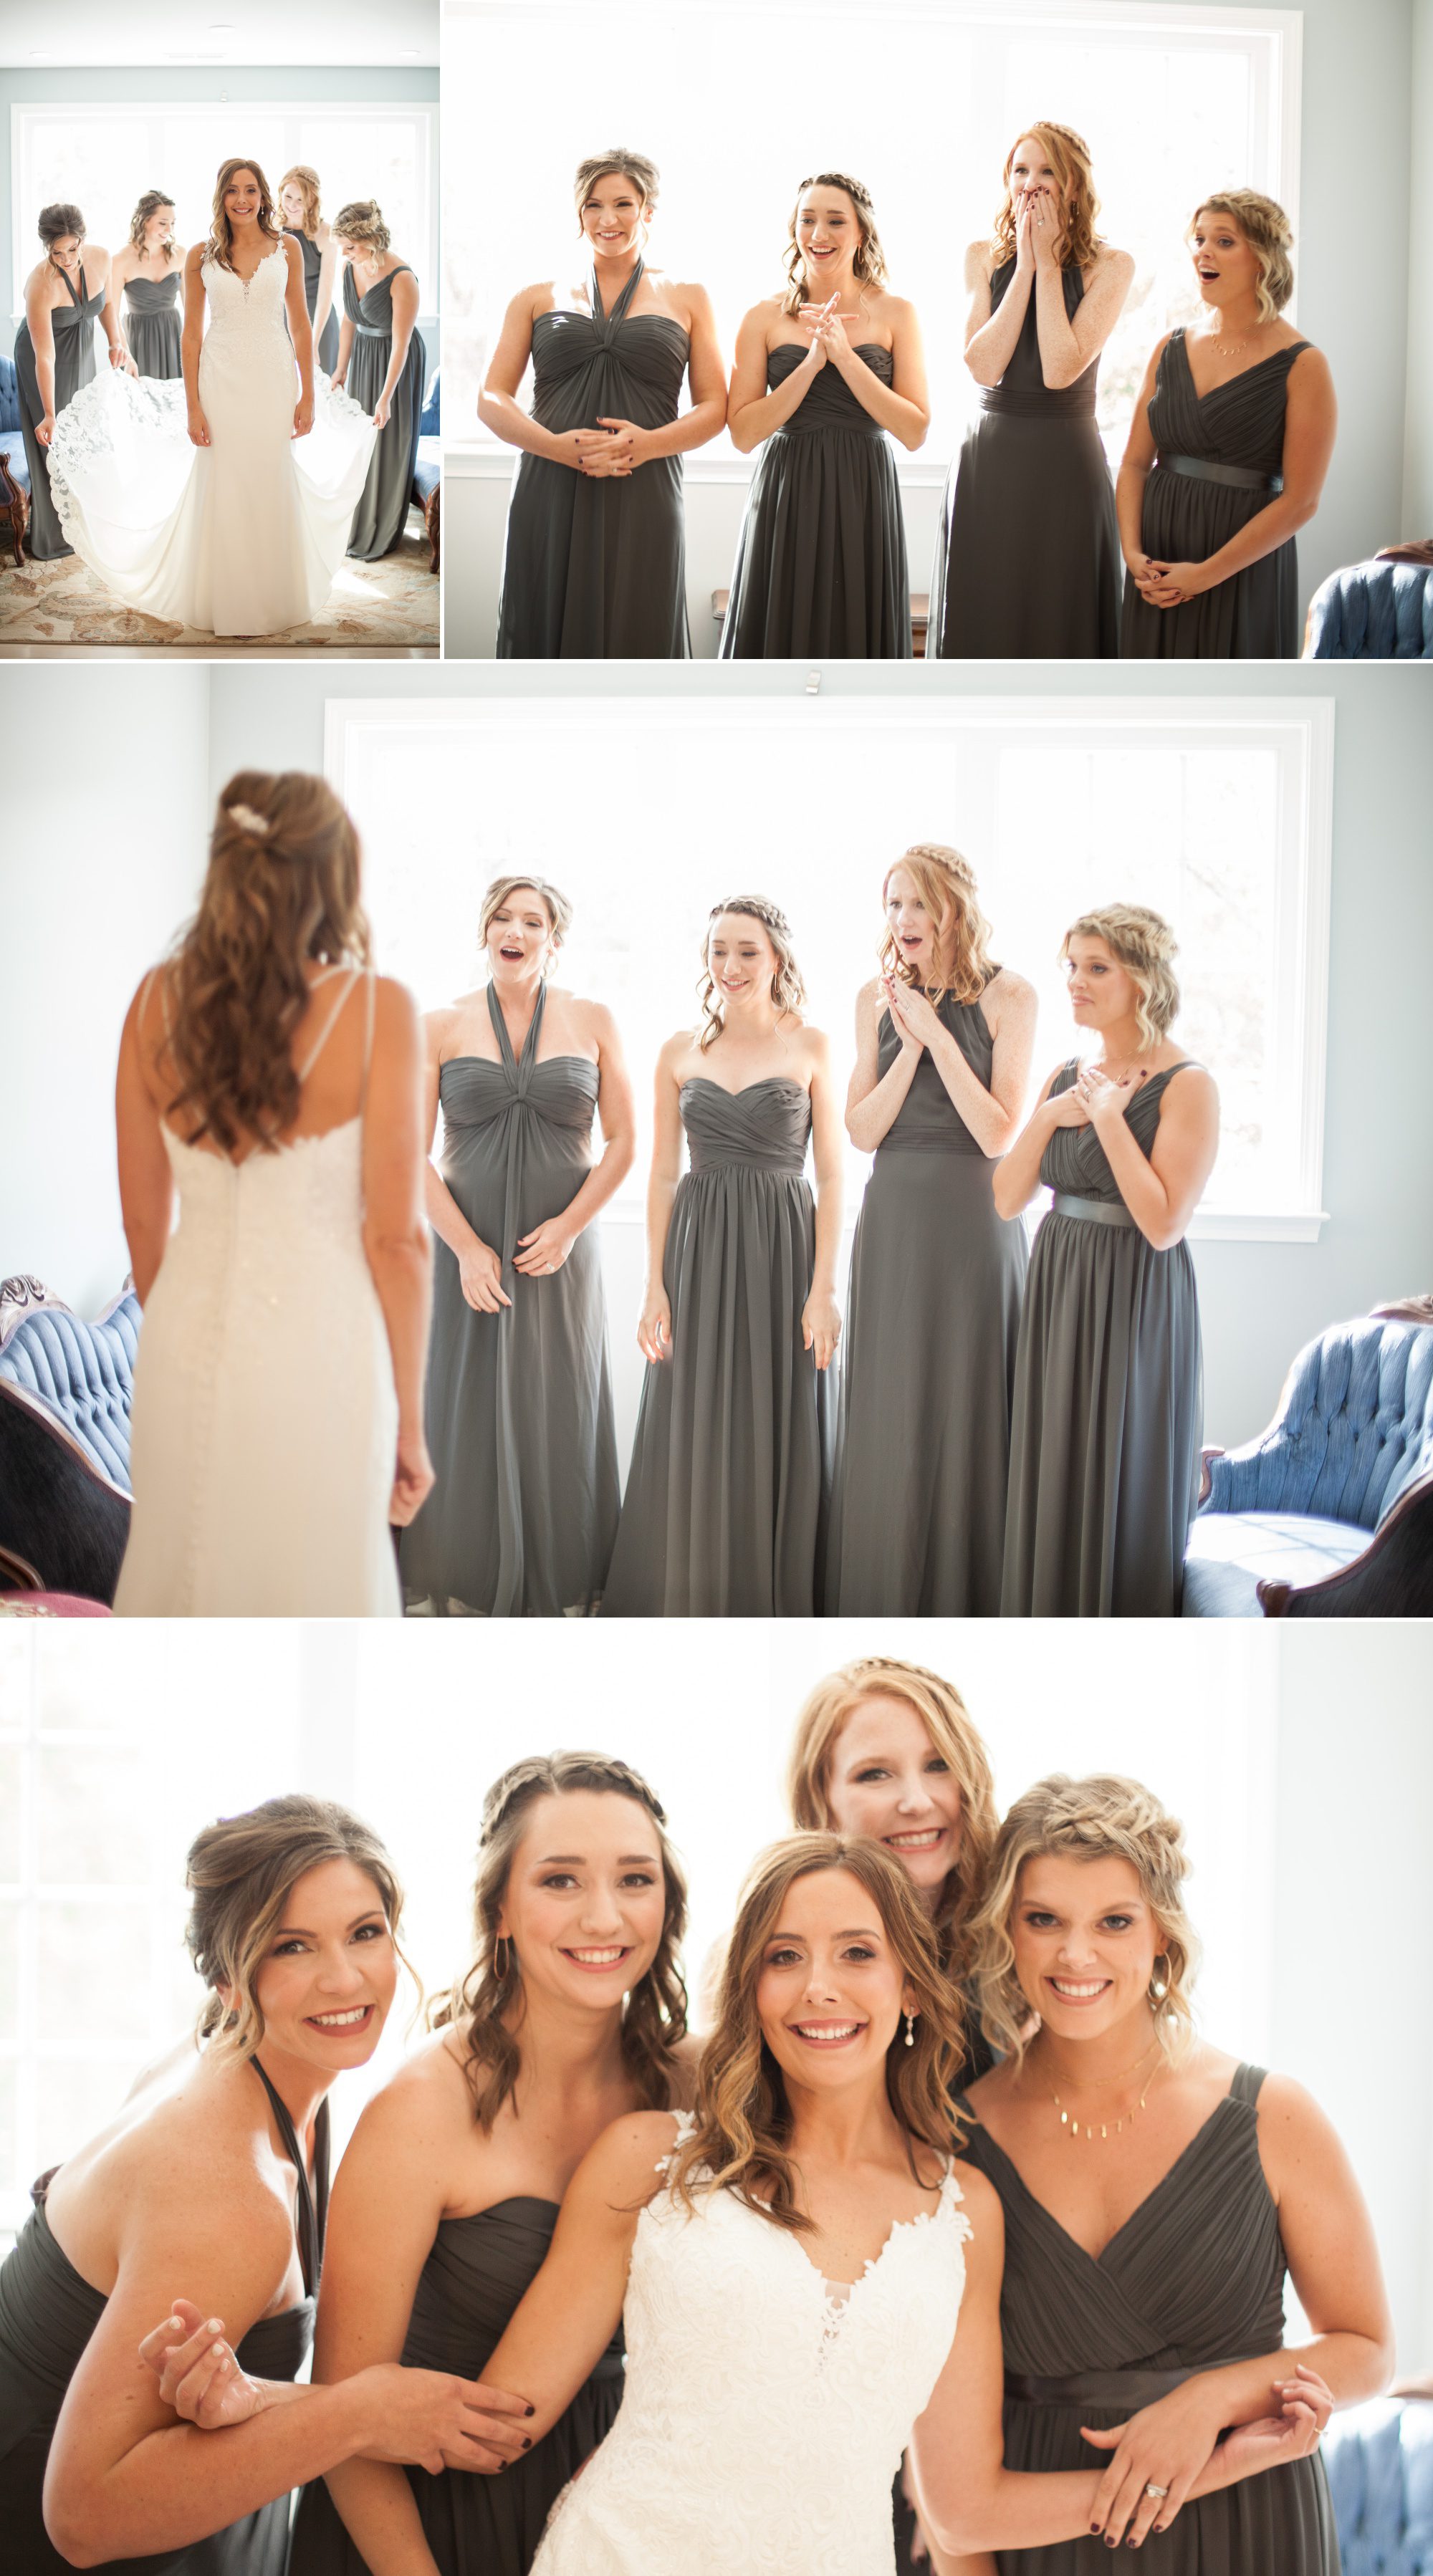 Bride shows dress to bridesmaids and group photos before wedding ceremony photography at Green Door Gourmet in Nashville, TN